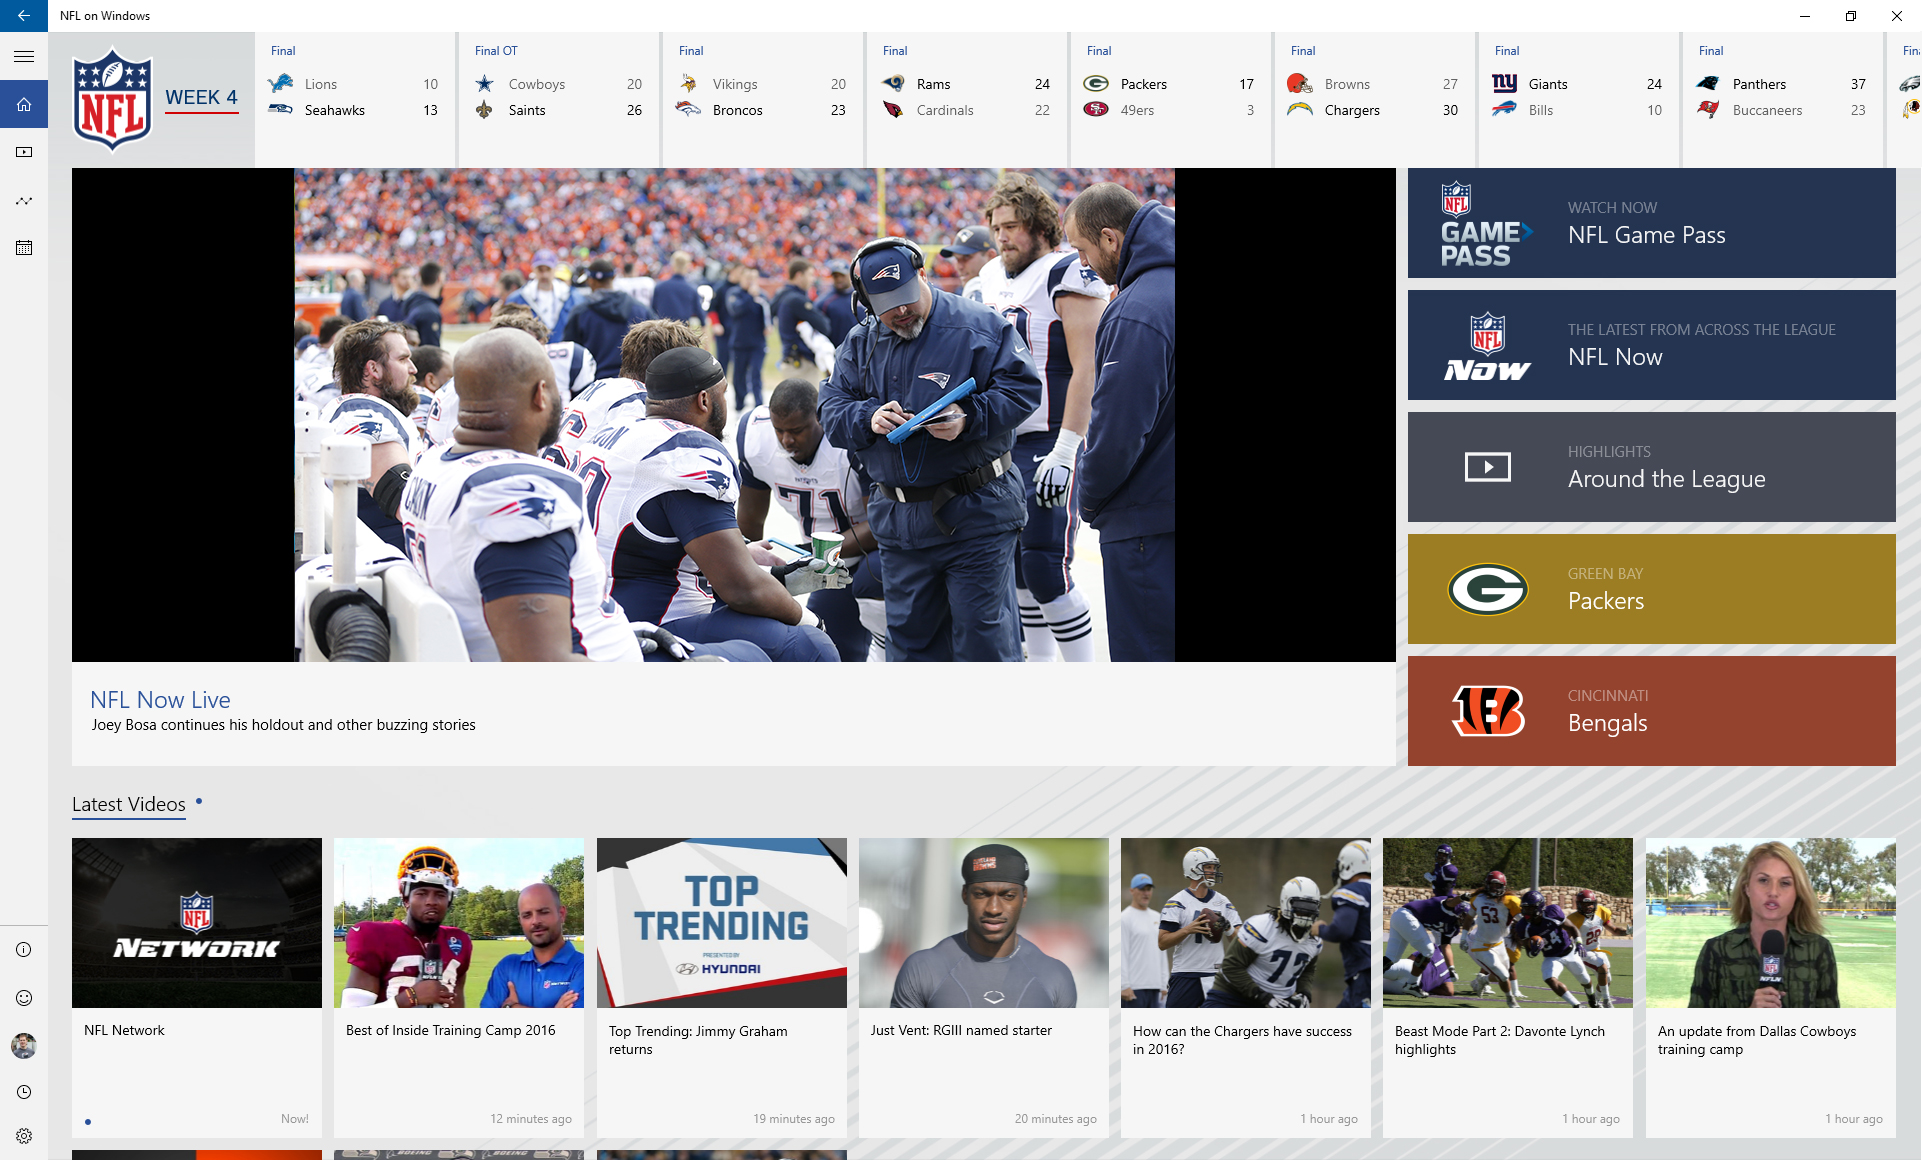 Large image of coach showing Surface to players on a sideline above several small tiles of photos representing different apps